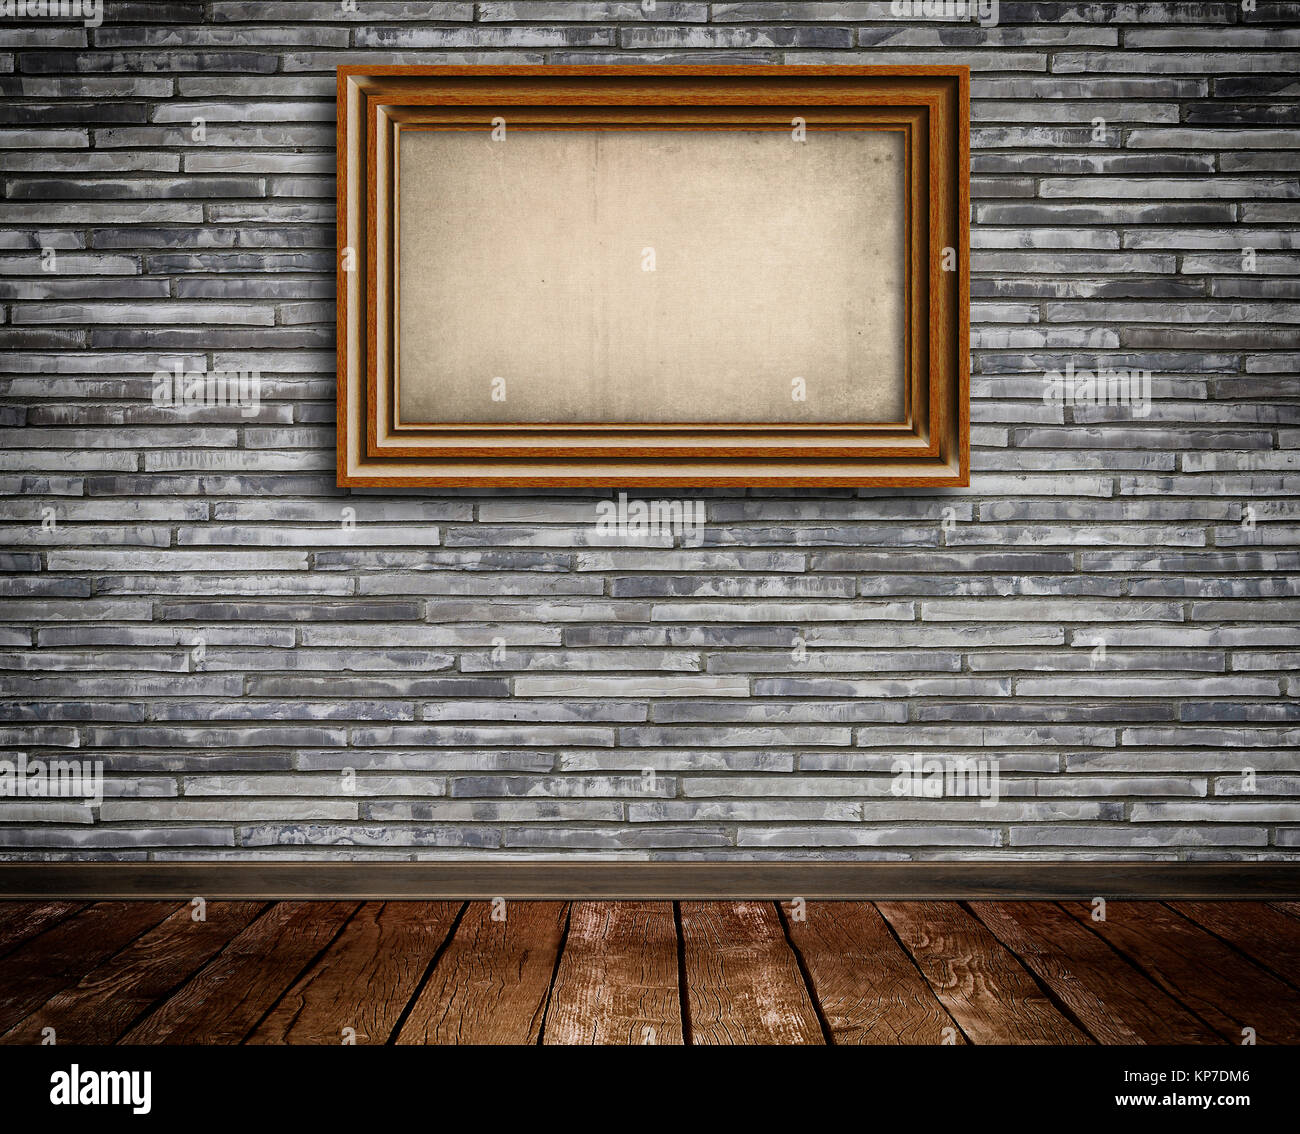 Old-fashioned wooden frame on a bricks wall. Natural material for the design. Stock Photo